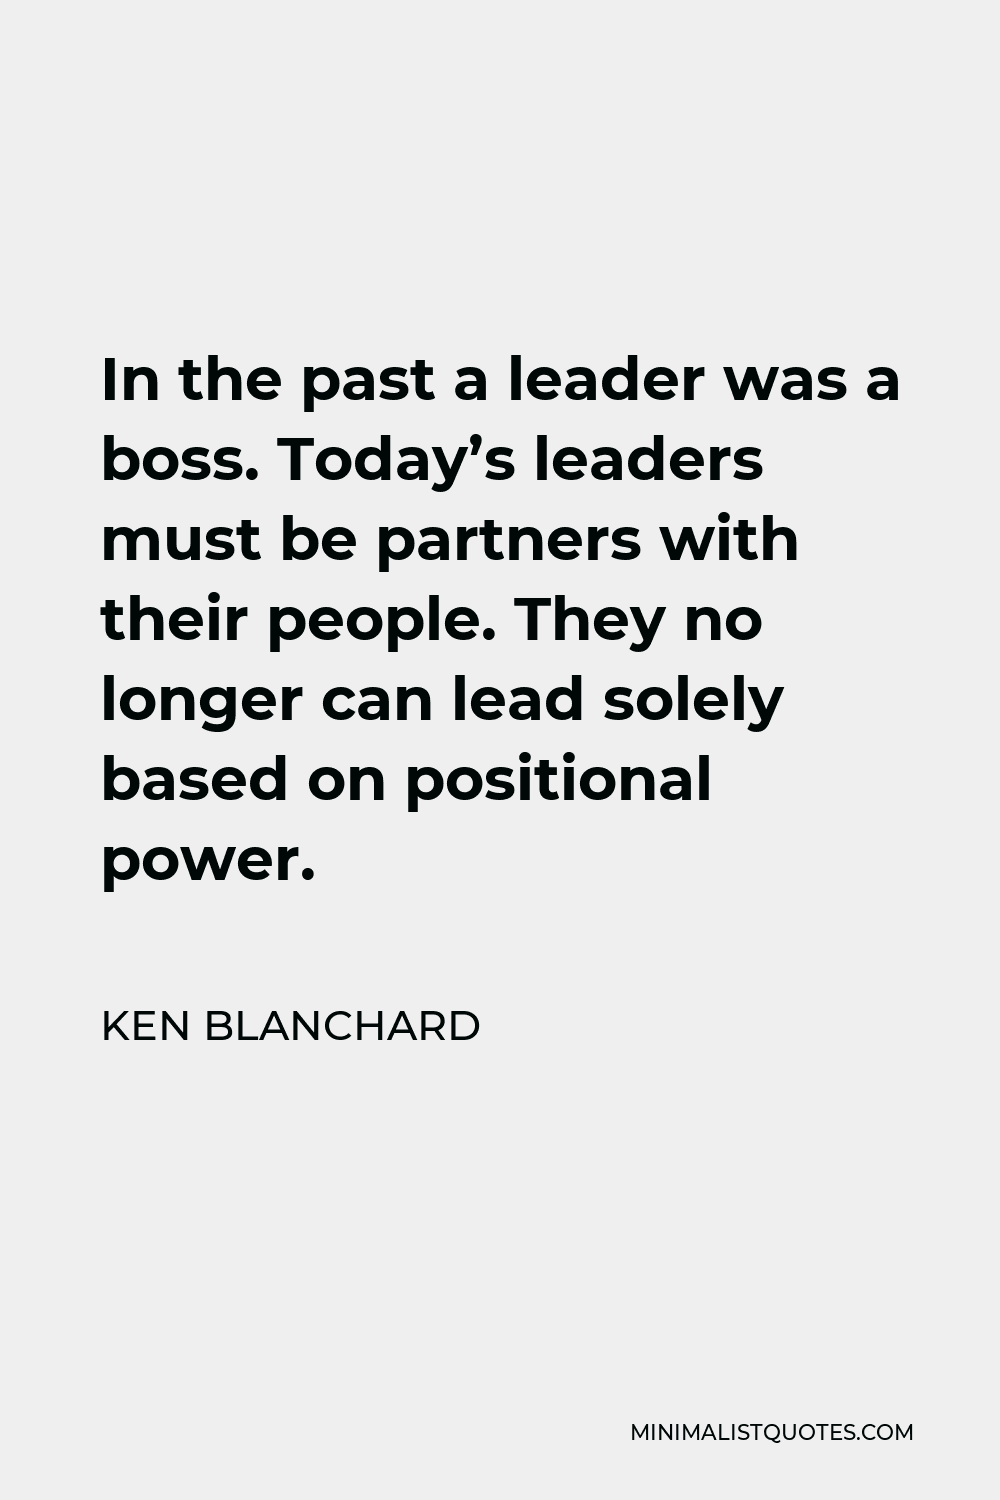 Ken Blanchard Quote - In the past a leader was a boss. Today’s leaders must be partners with their people. They no longer can lead solely based on positional power.